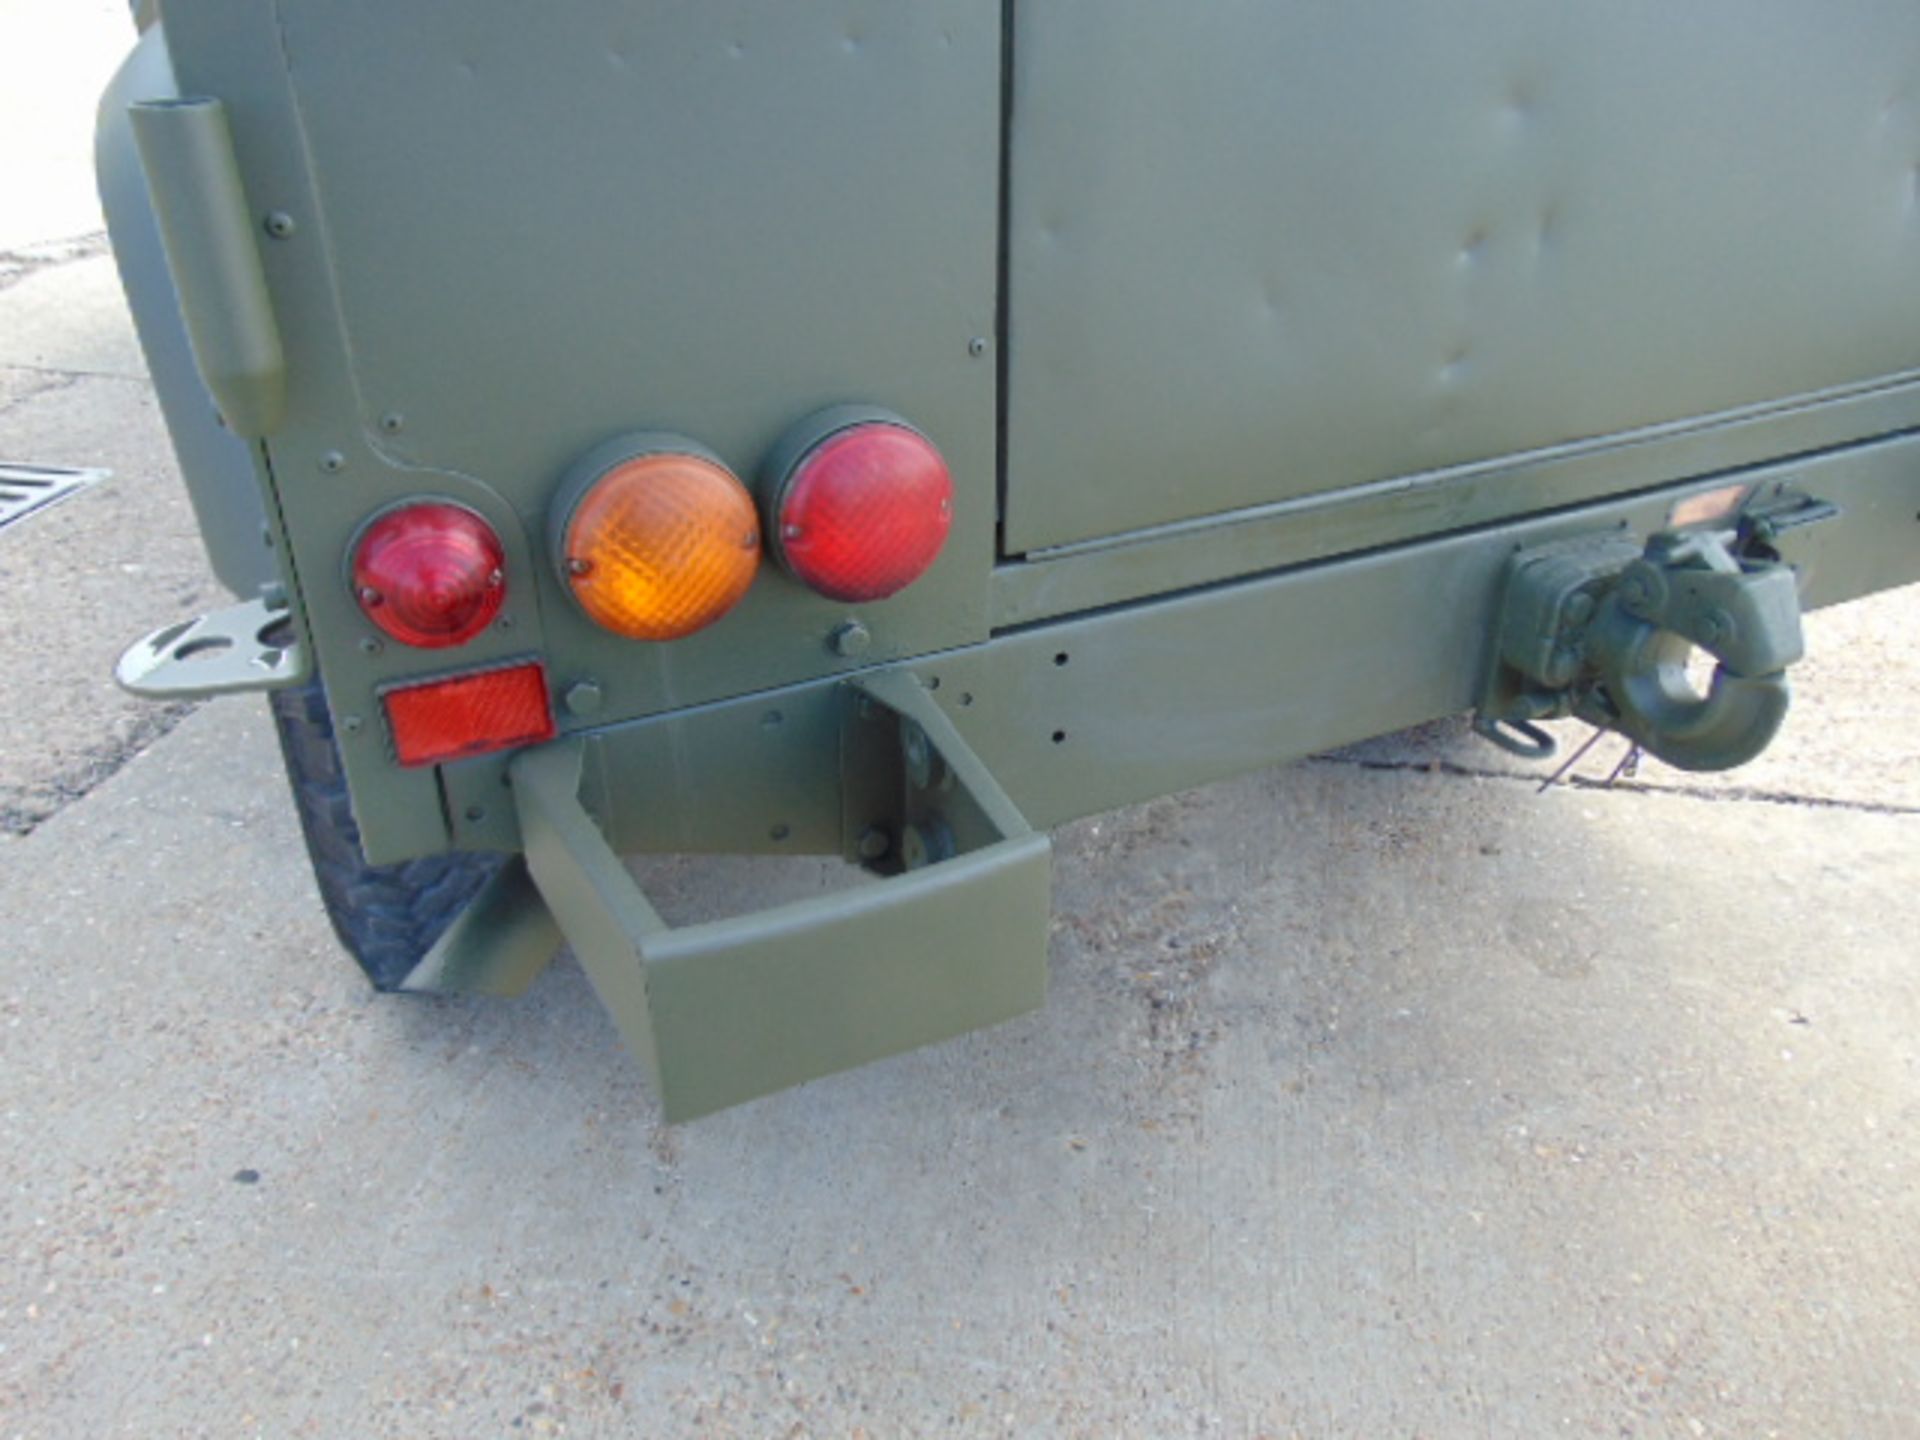 Military Specification Land Rover Wolf 110 Hard Top - Image 13 of 28